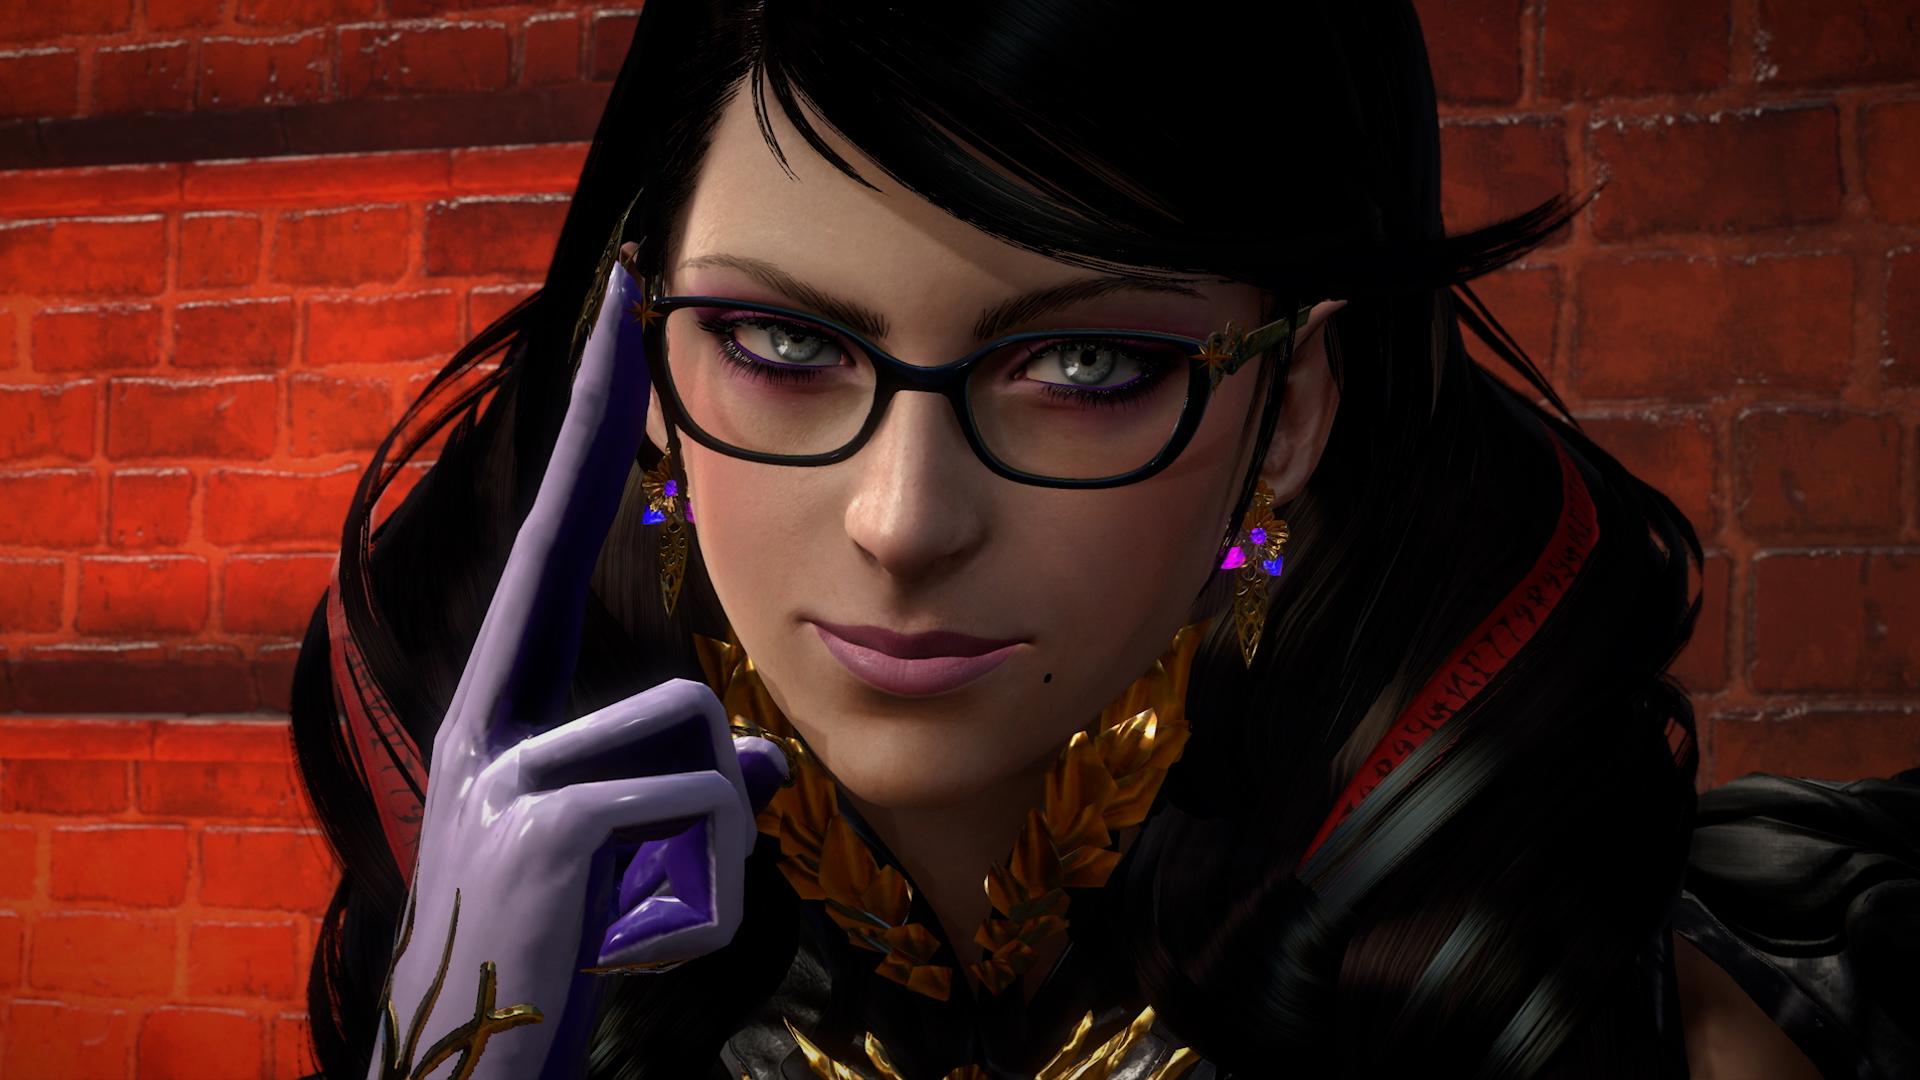 Bayonetta 3 has added a 'nudity censoring mode', says Platinum